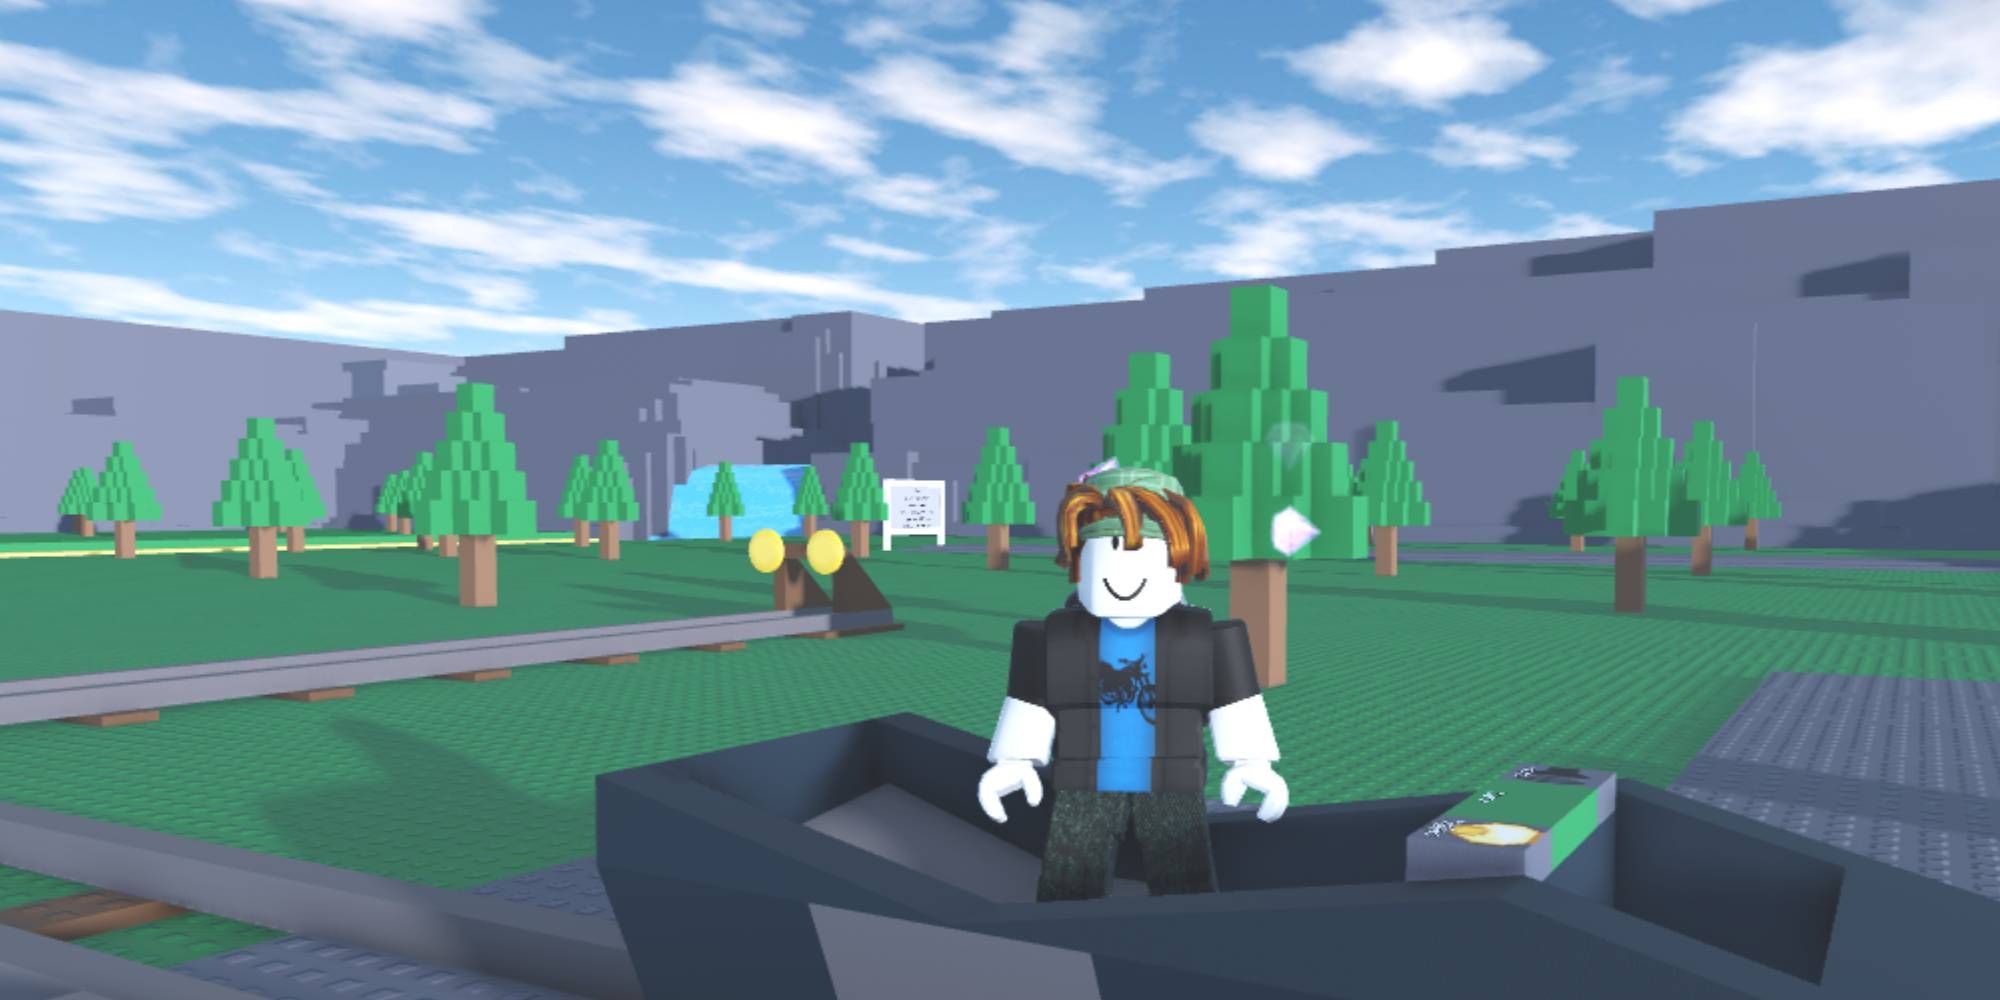 Mineblox Tycoon OLD Roblox Game Info & Codes (October 2023)